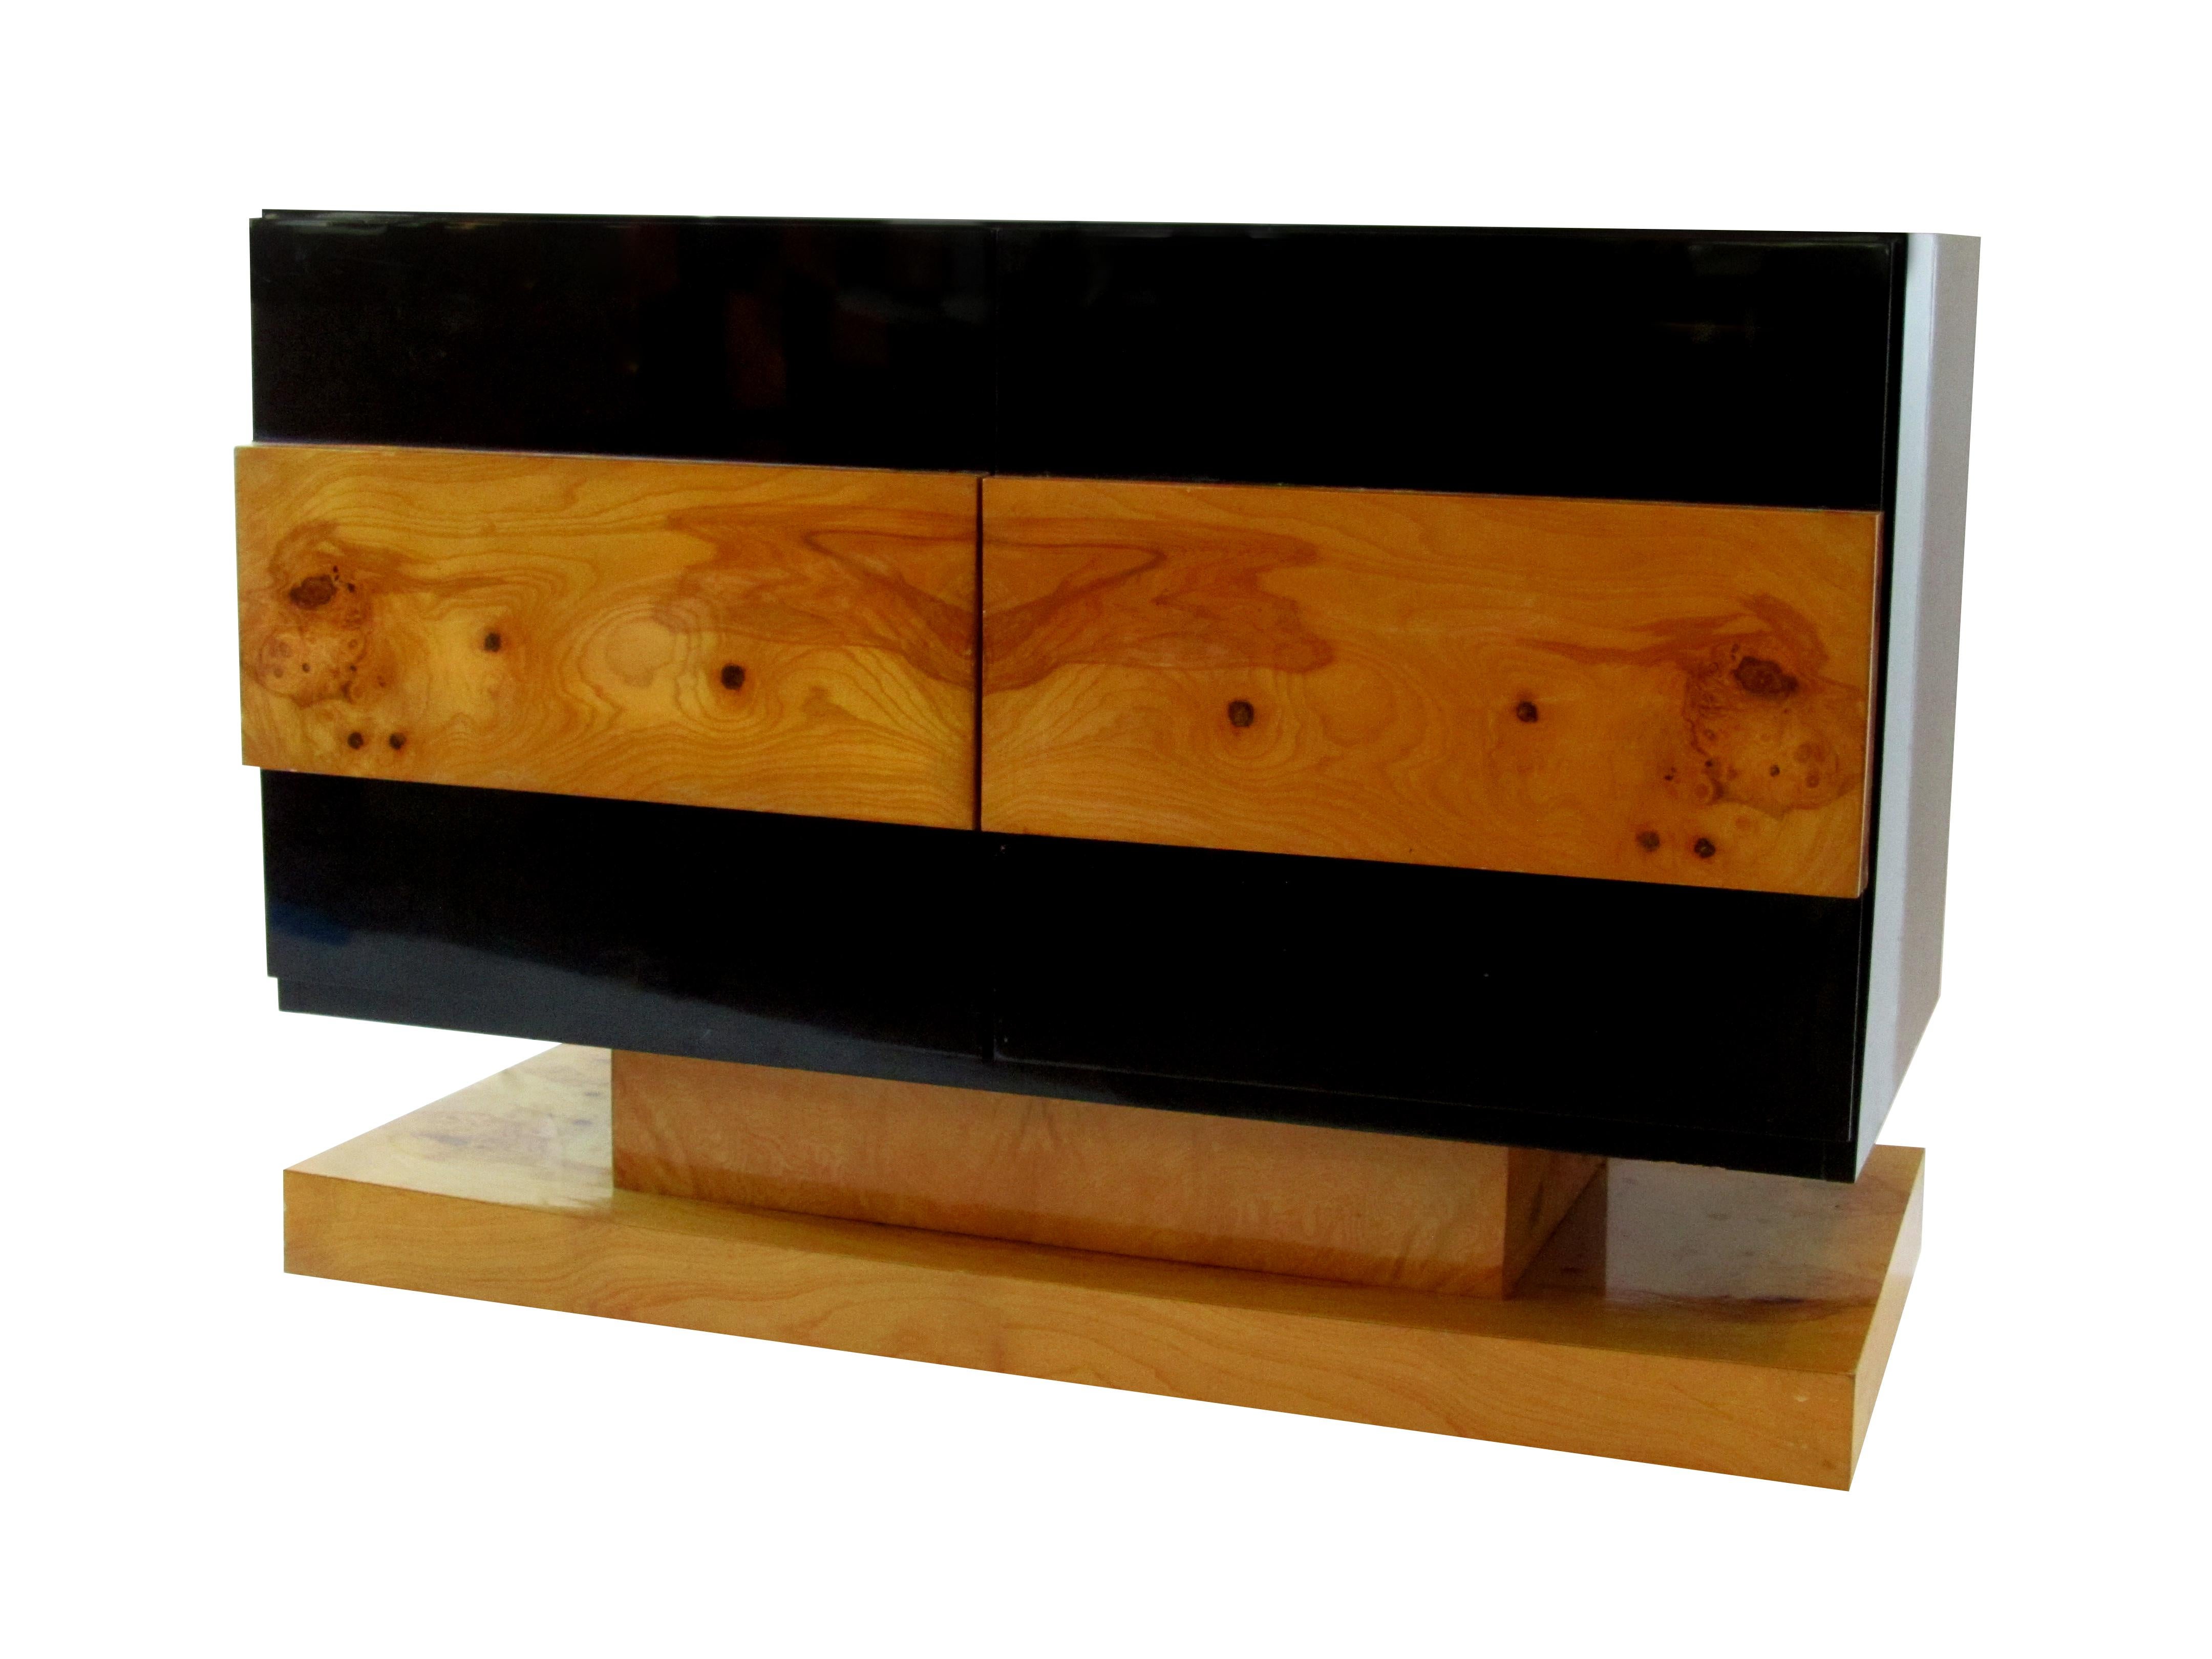 Late 20th Century Pair of American Modern Black Lacquer and Burled Wood Credenzas, Vladimir Kagan